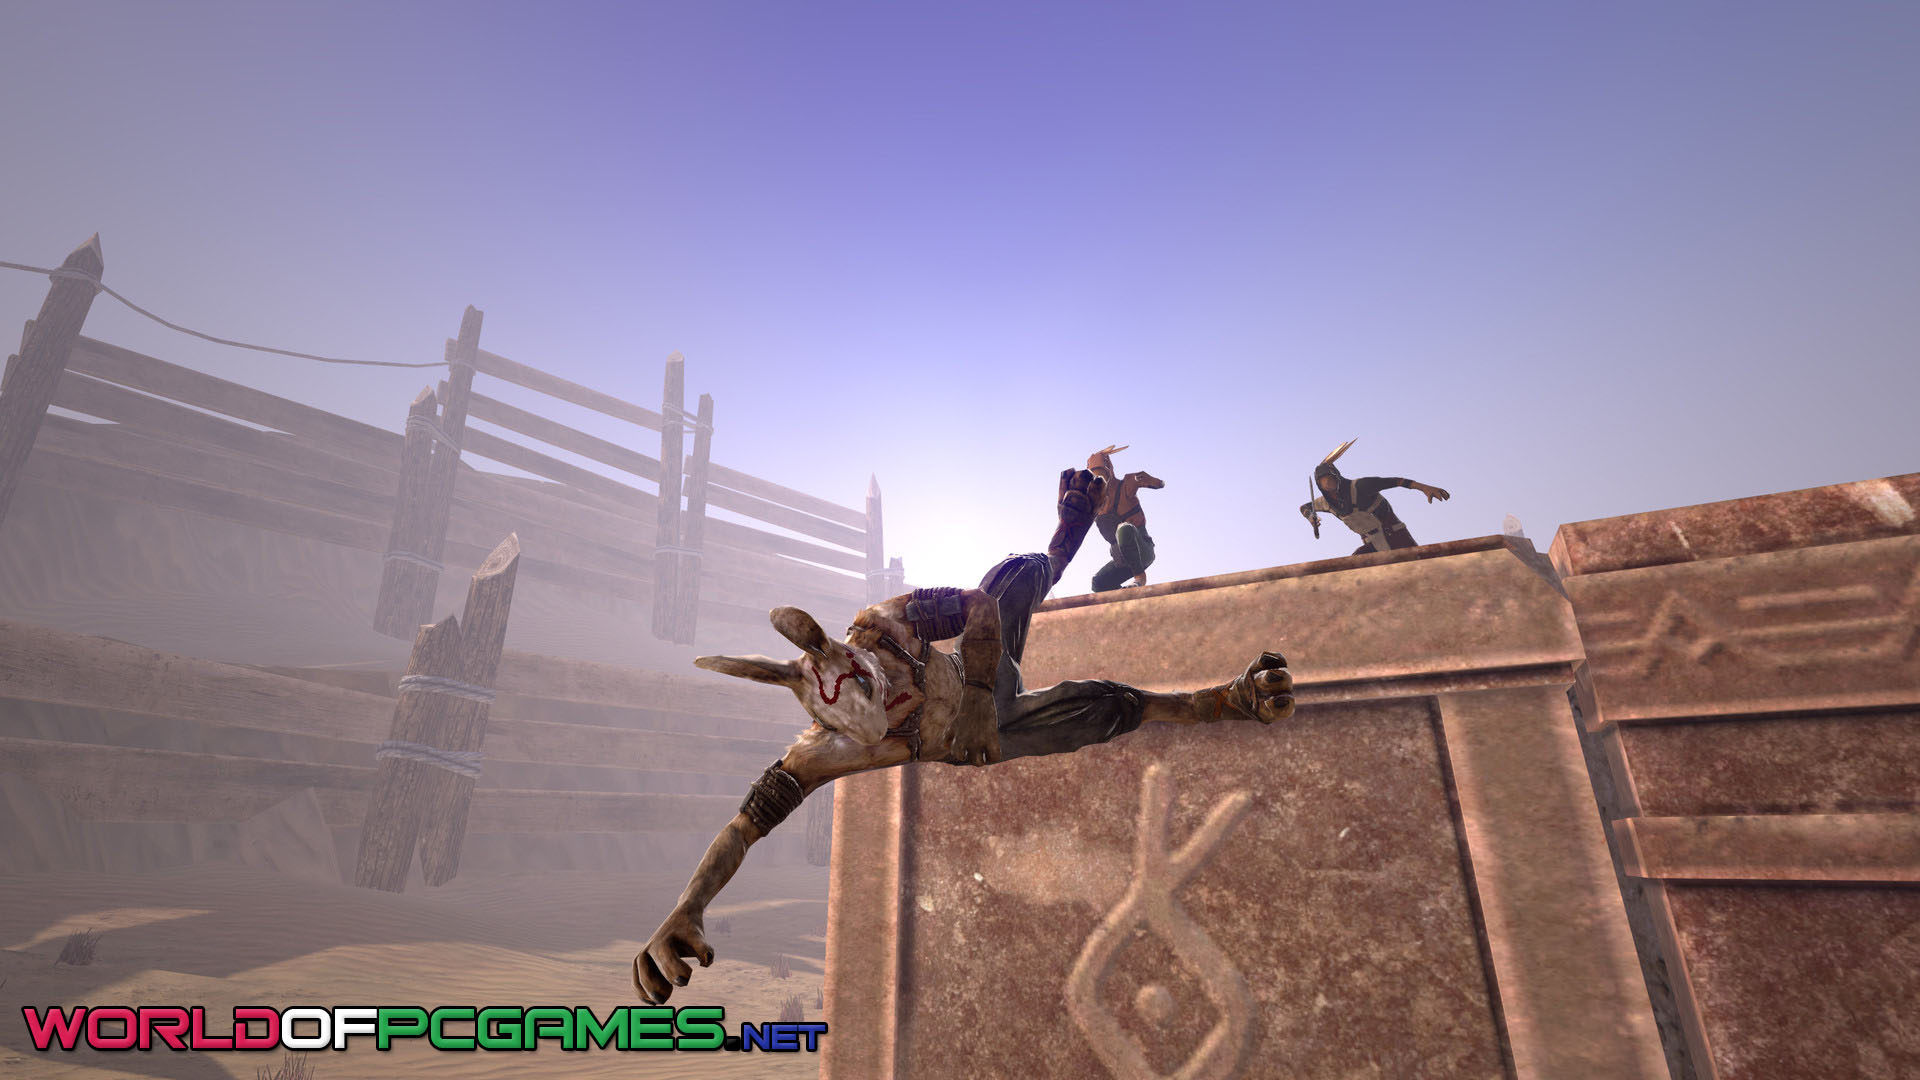 Overgrowth Free Download By worldof-pcgames.net